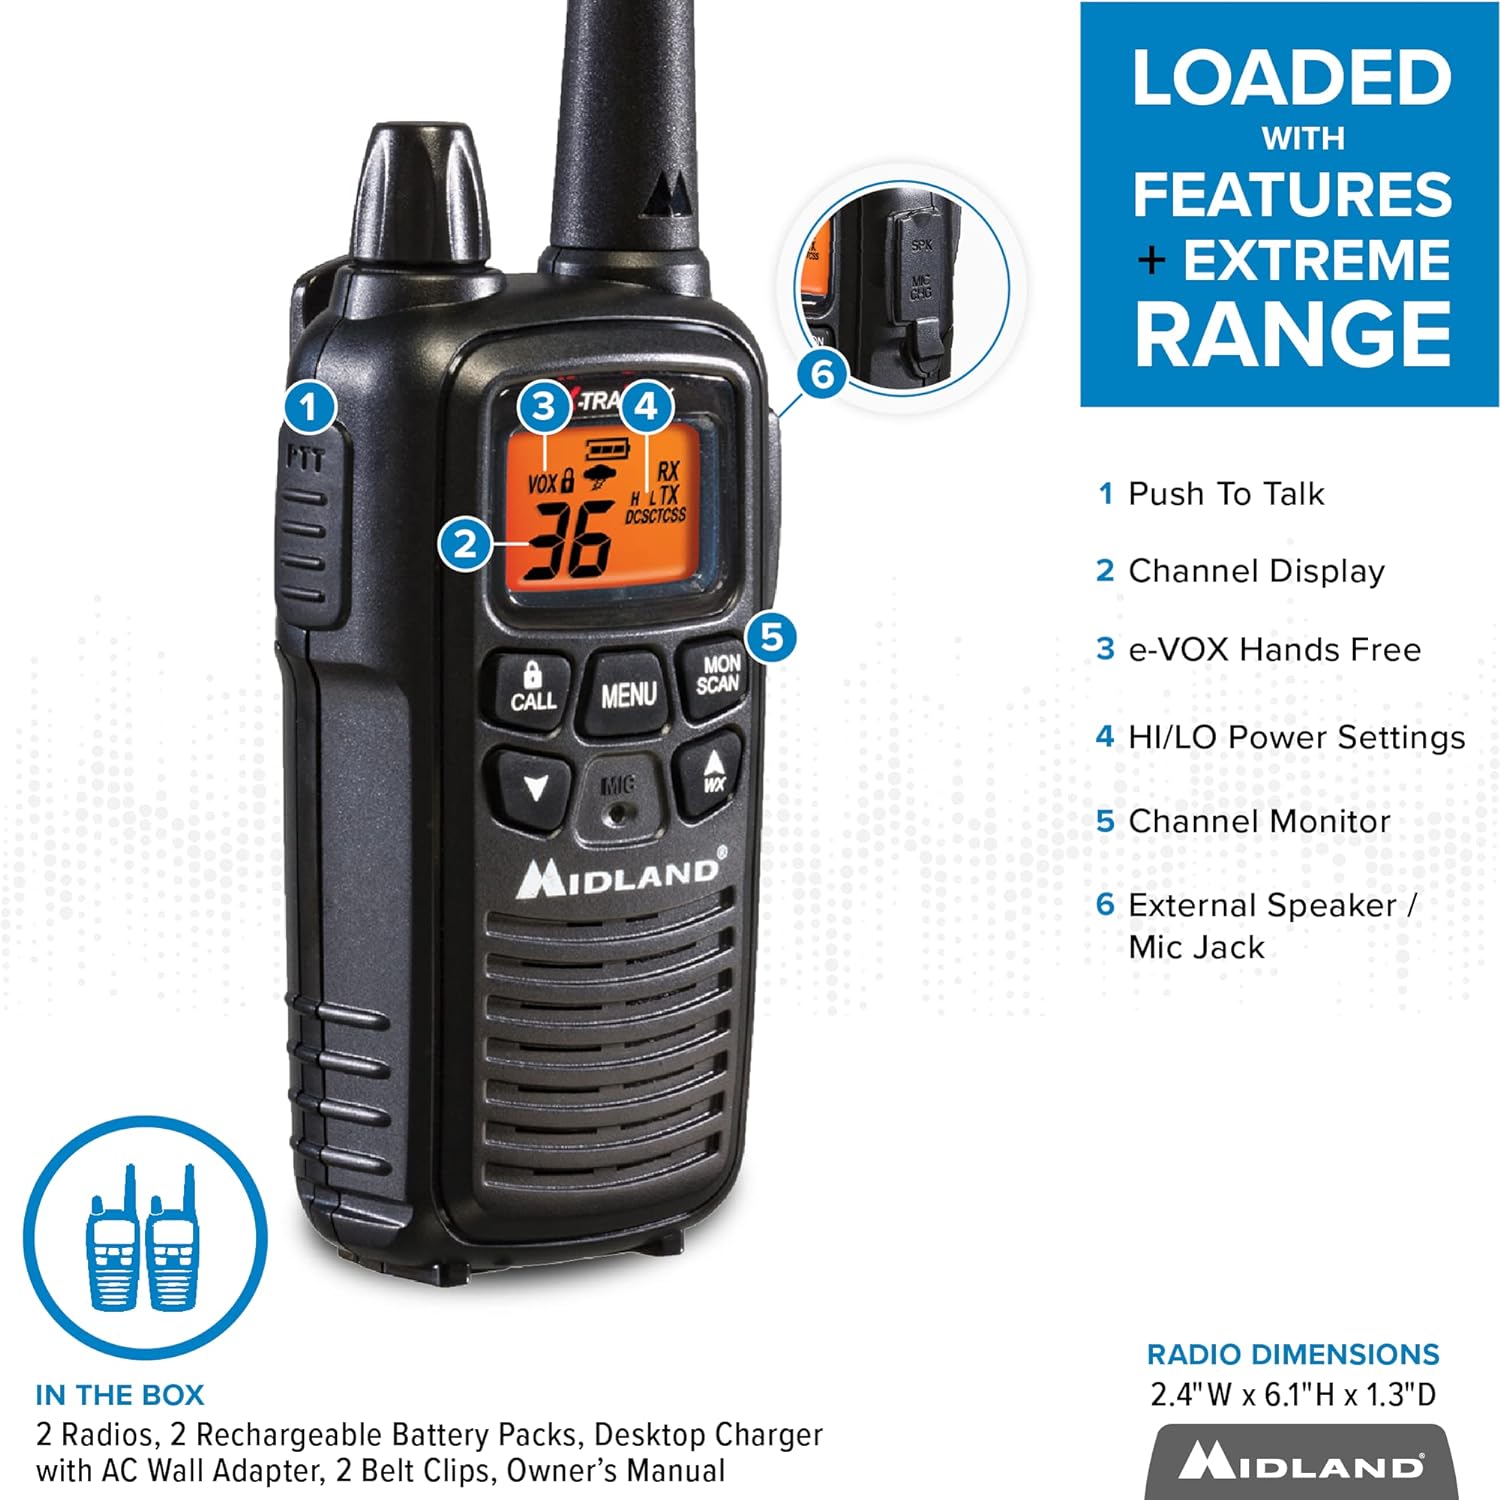 Midland - LXT600VP3 - Handheld Portable FRS Business Overlanding Gear Two Way Radio - Long Range Rechargeable Walkie Talkies for Adults - 121 Privacy Codes, Weather Radio - Black (2 Pack)